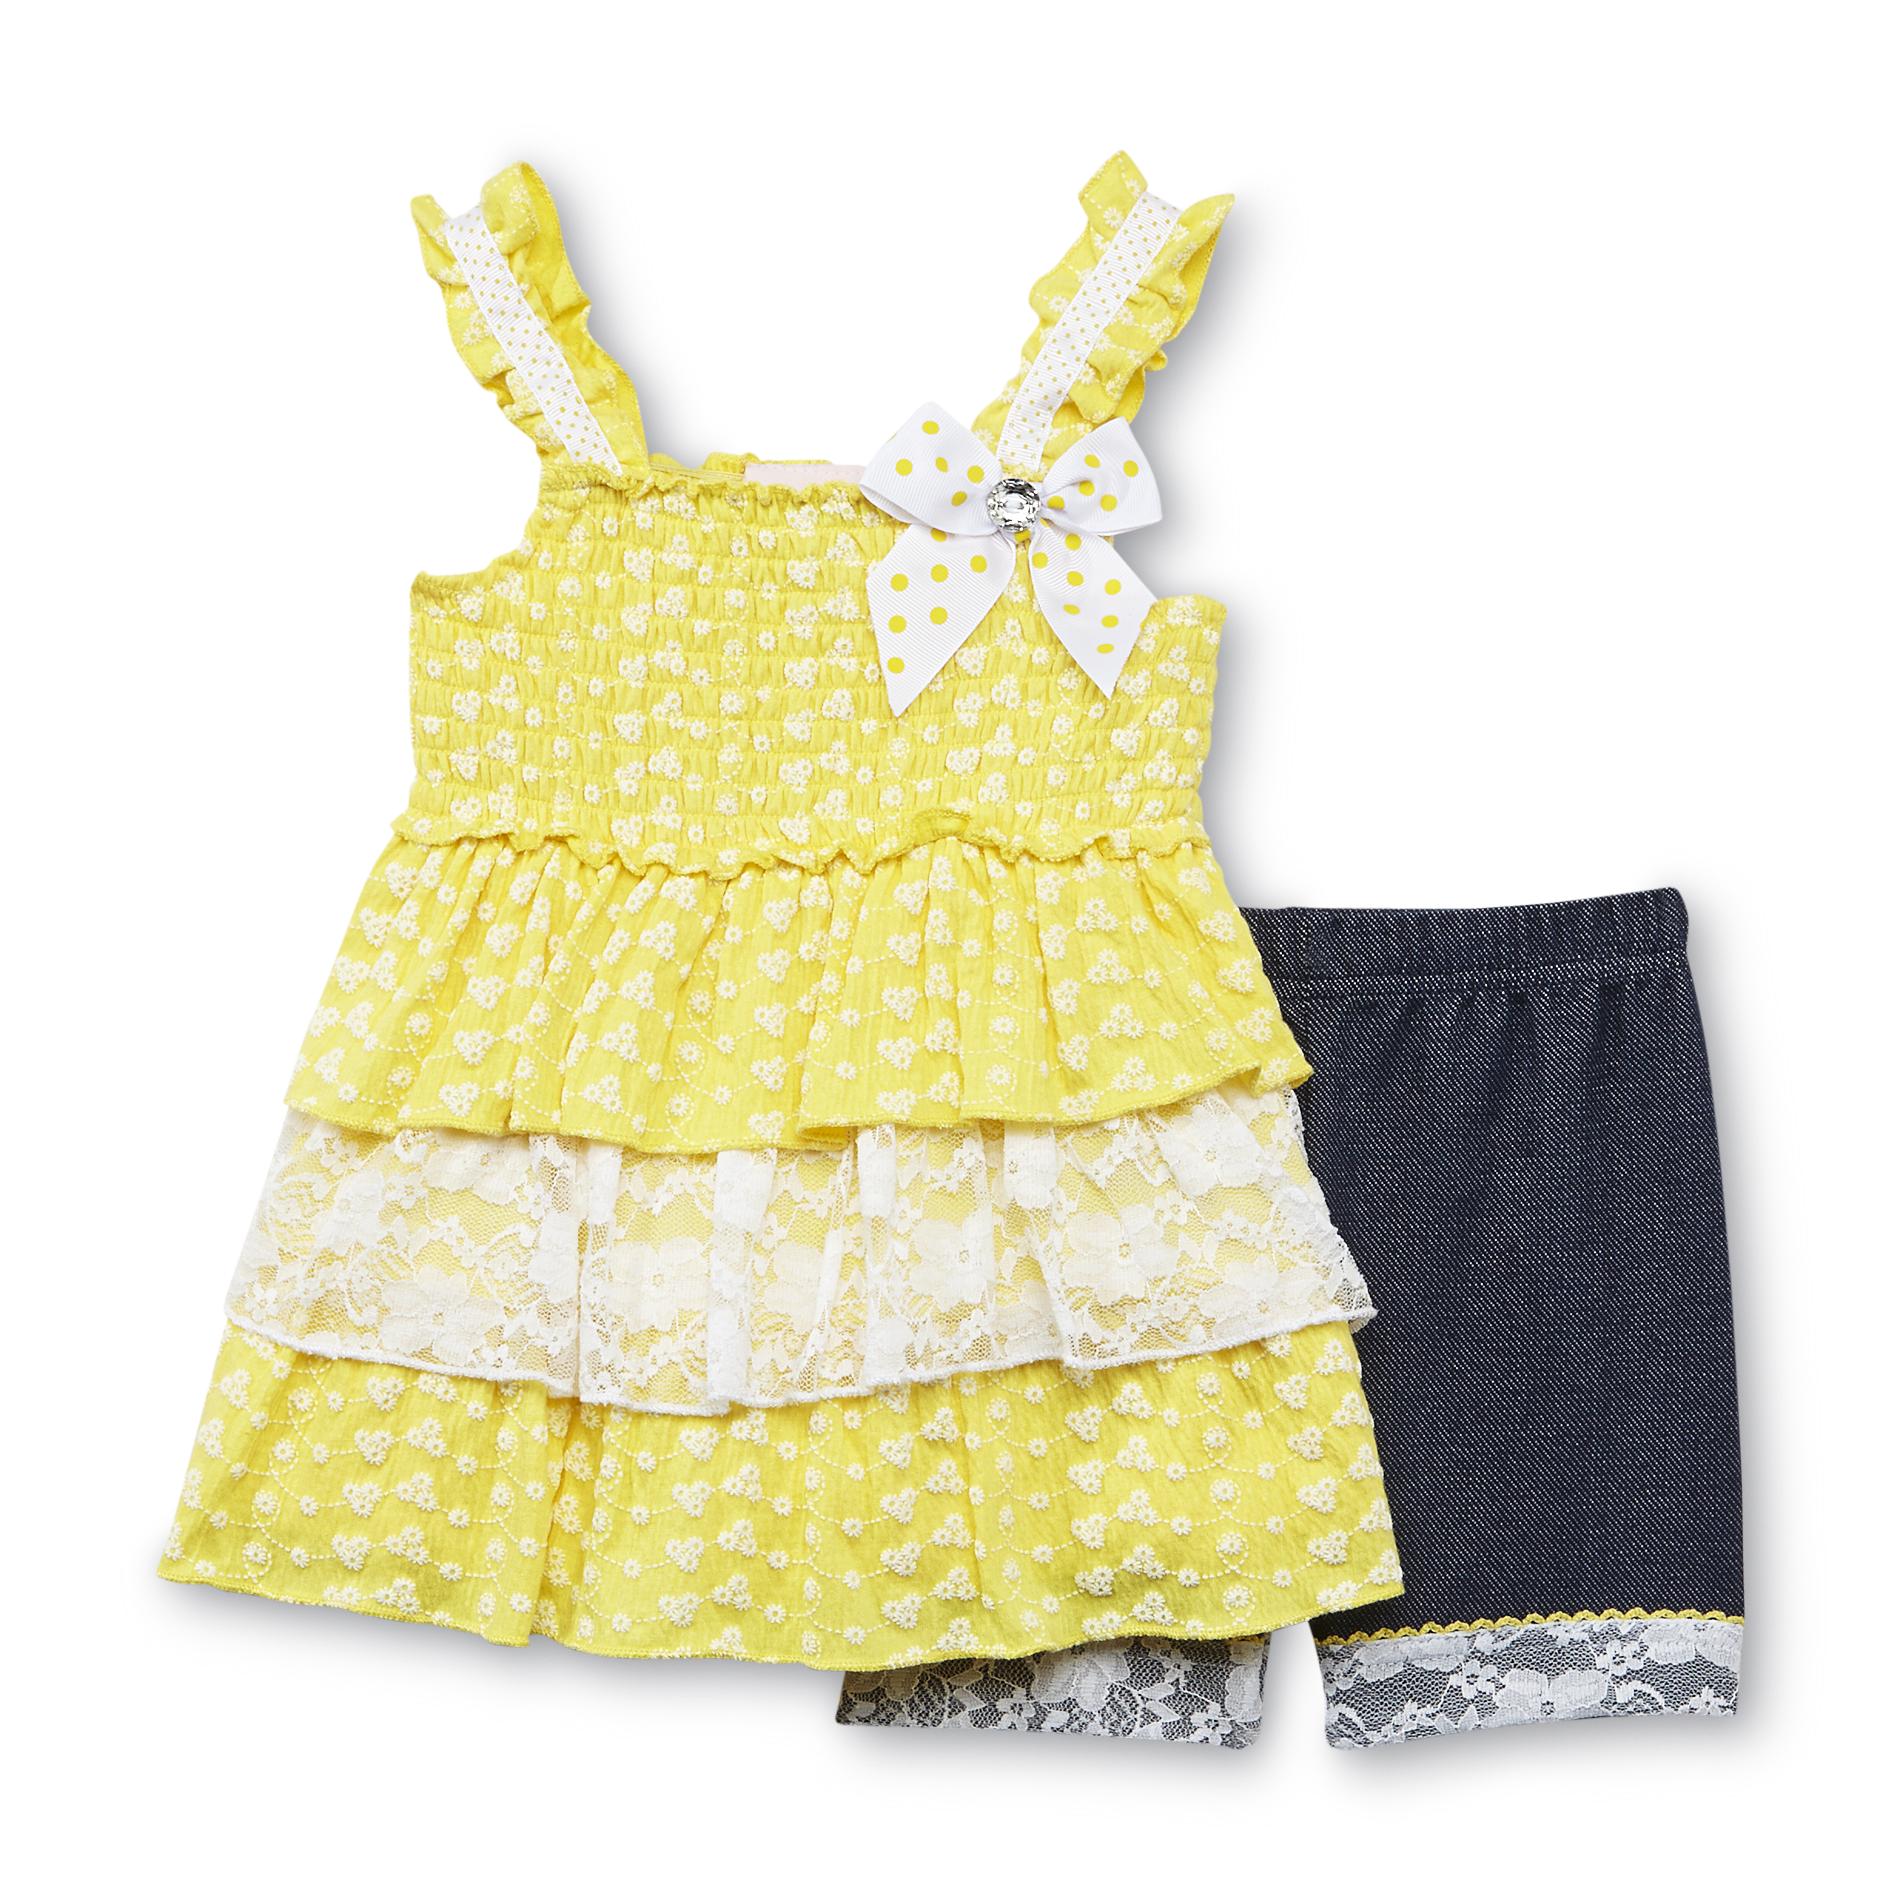 Little Lass Infant & Toddler Girl's Tunic & Shorts - Floral & Lace